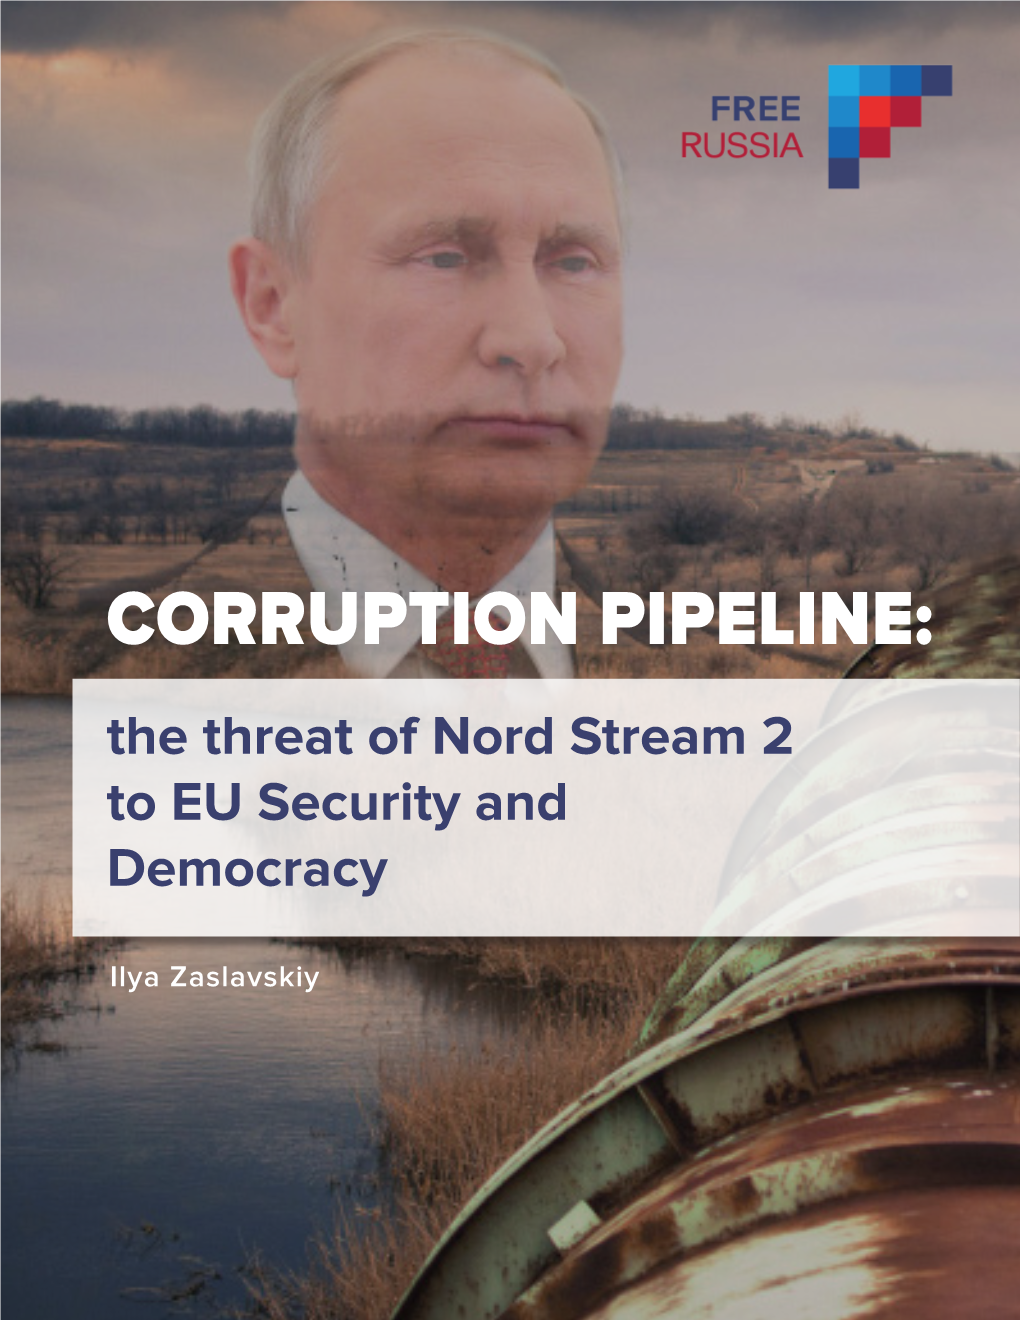 CORRUPTION PIPELINE: the Threat of Nord Stream 2 to EU Security and Democracy